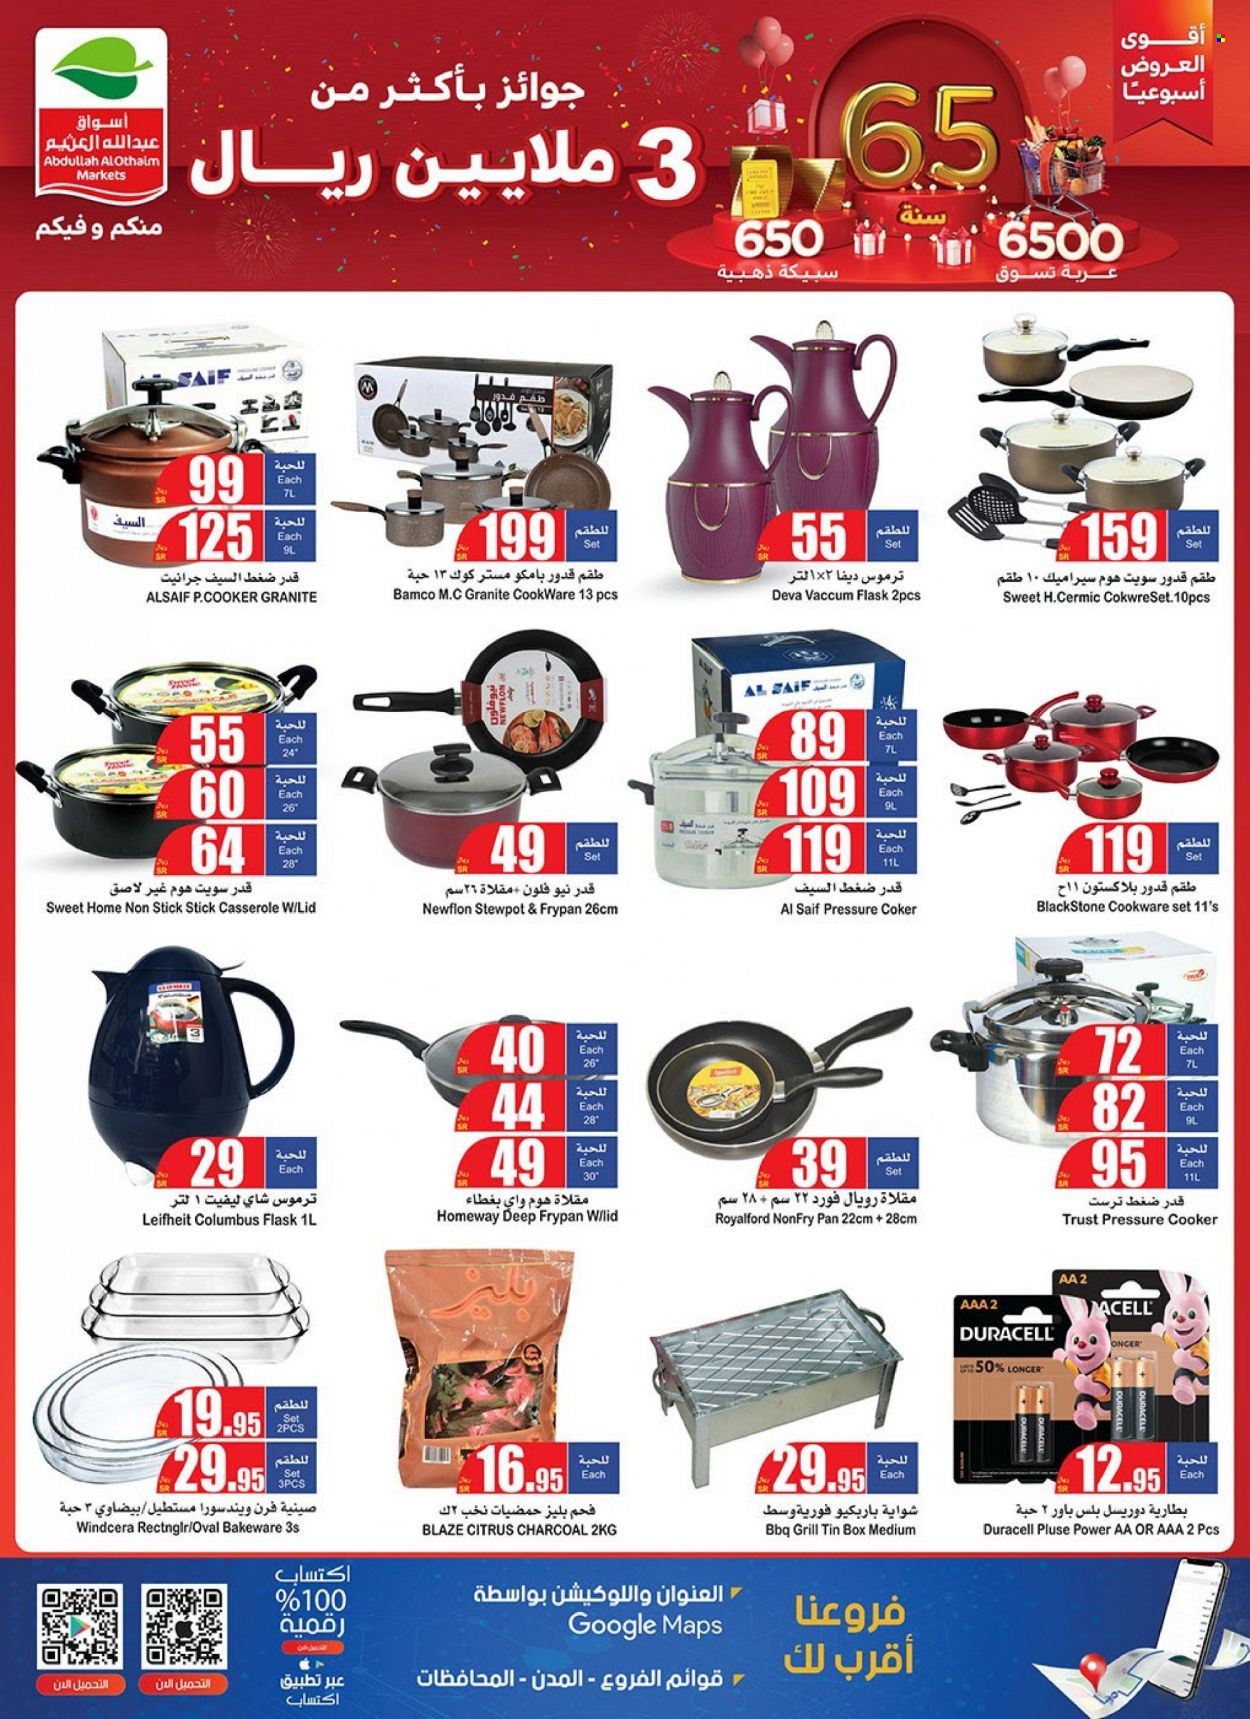 <retailer> - <MM.DD.YYYY - MM.DD.YYYY> - Sales products - ,<products from offers>. Page 37.